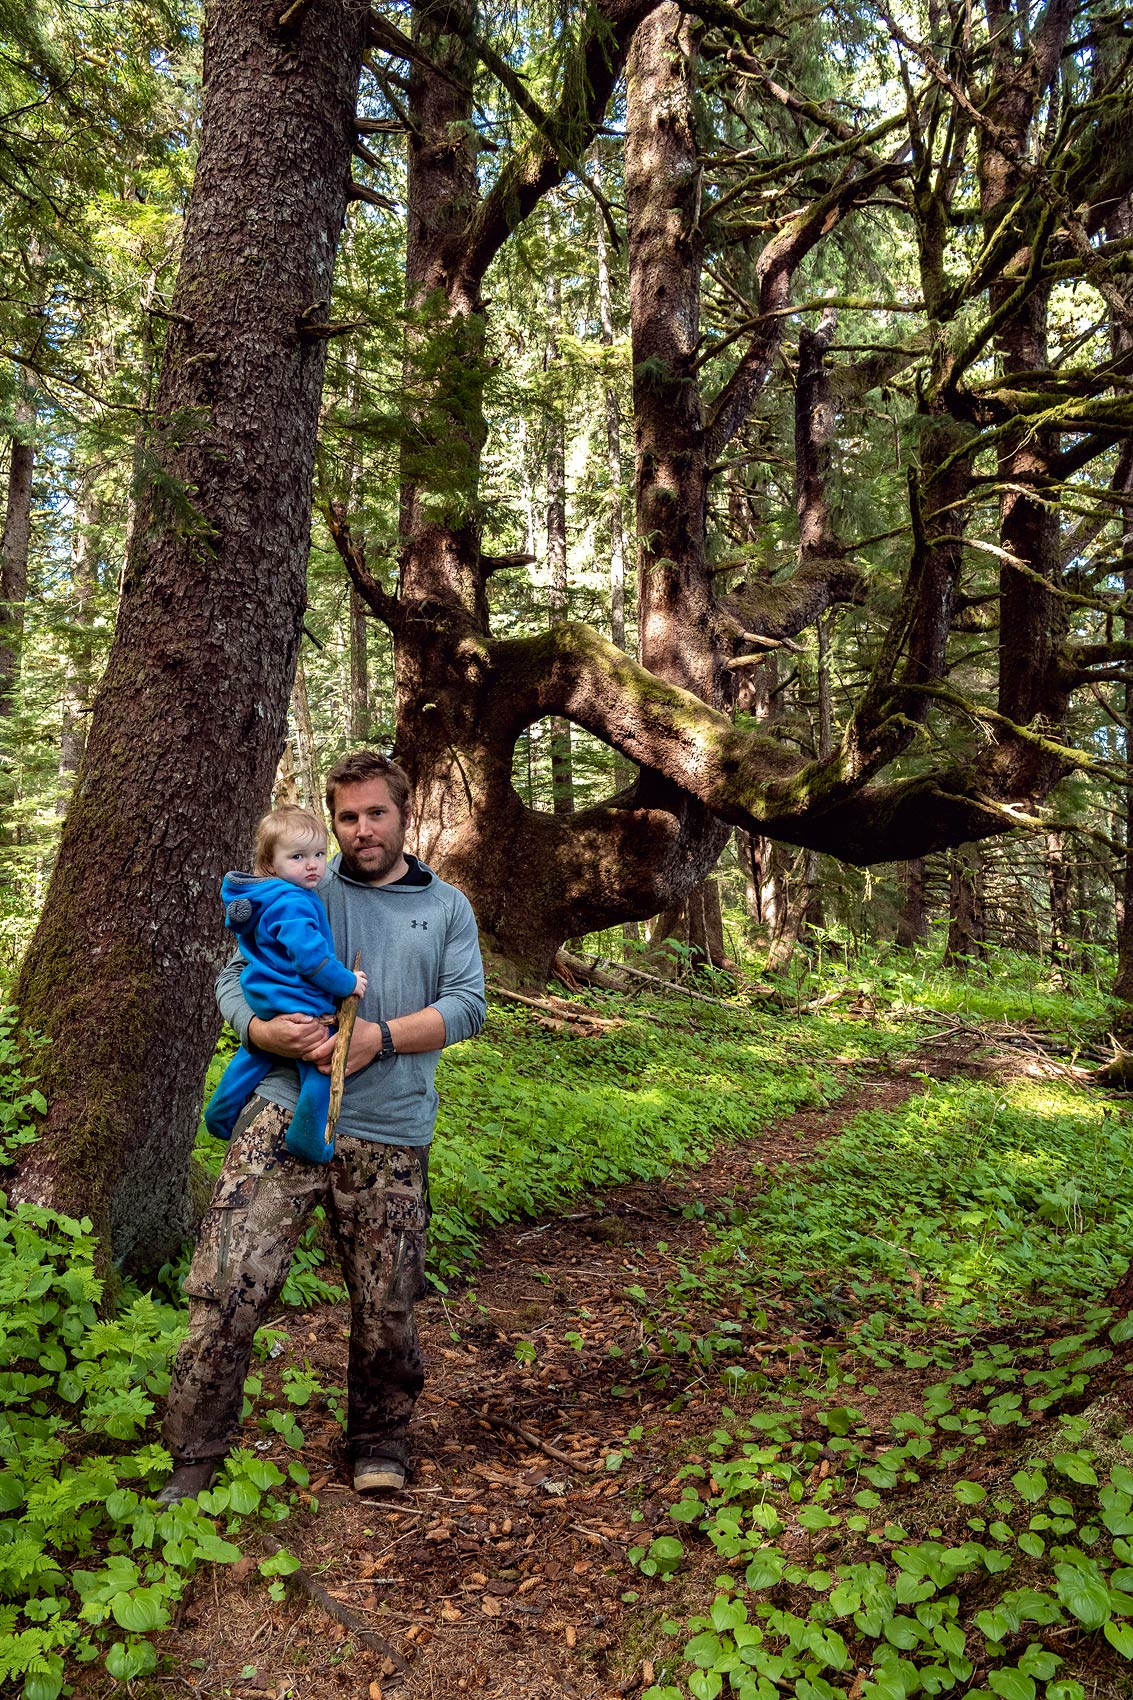 A man in a blue shirt and camo pants holds his young son in an old-growth forest.